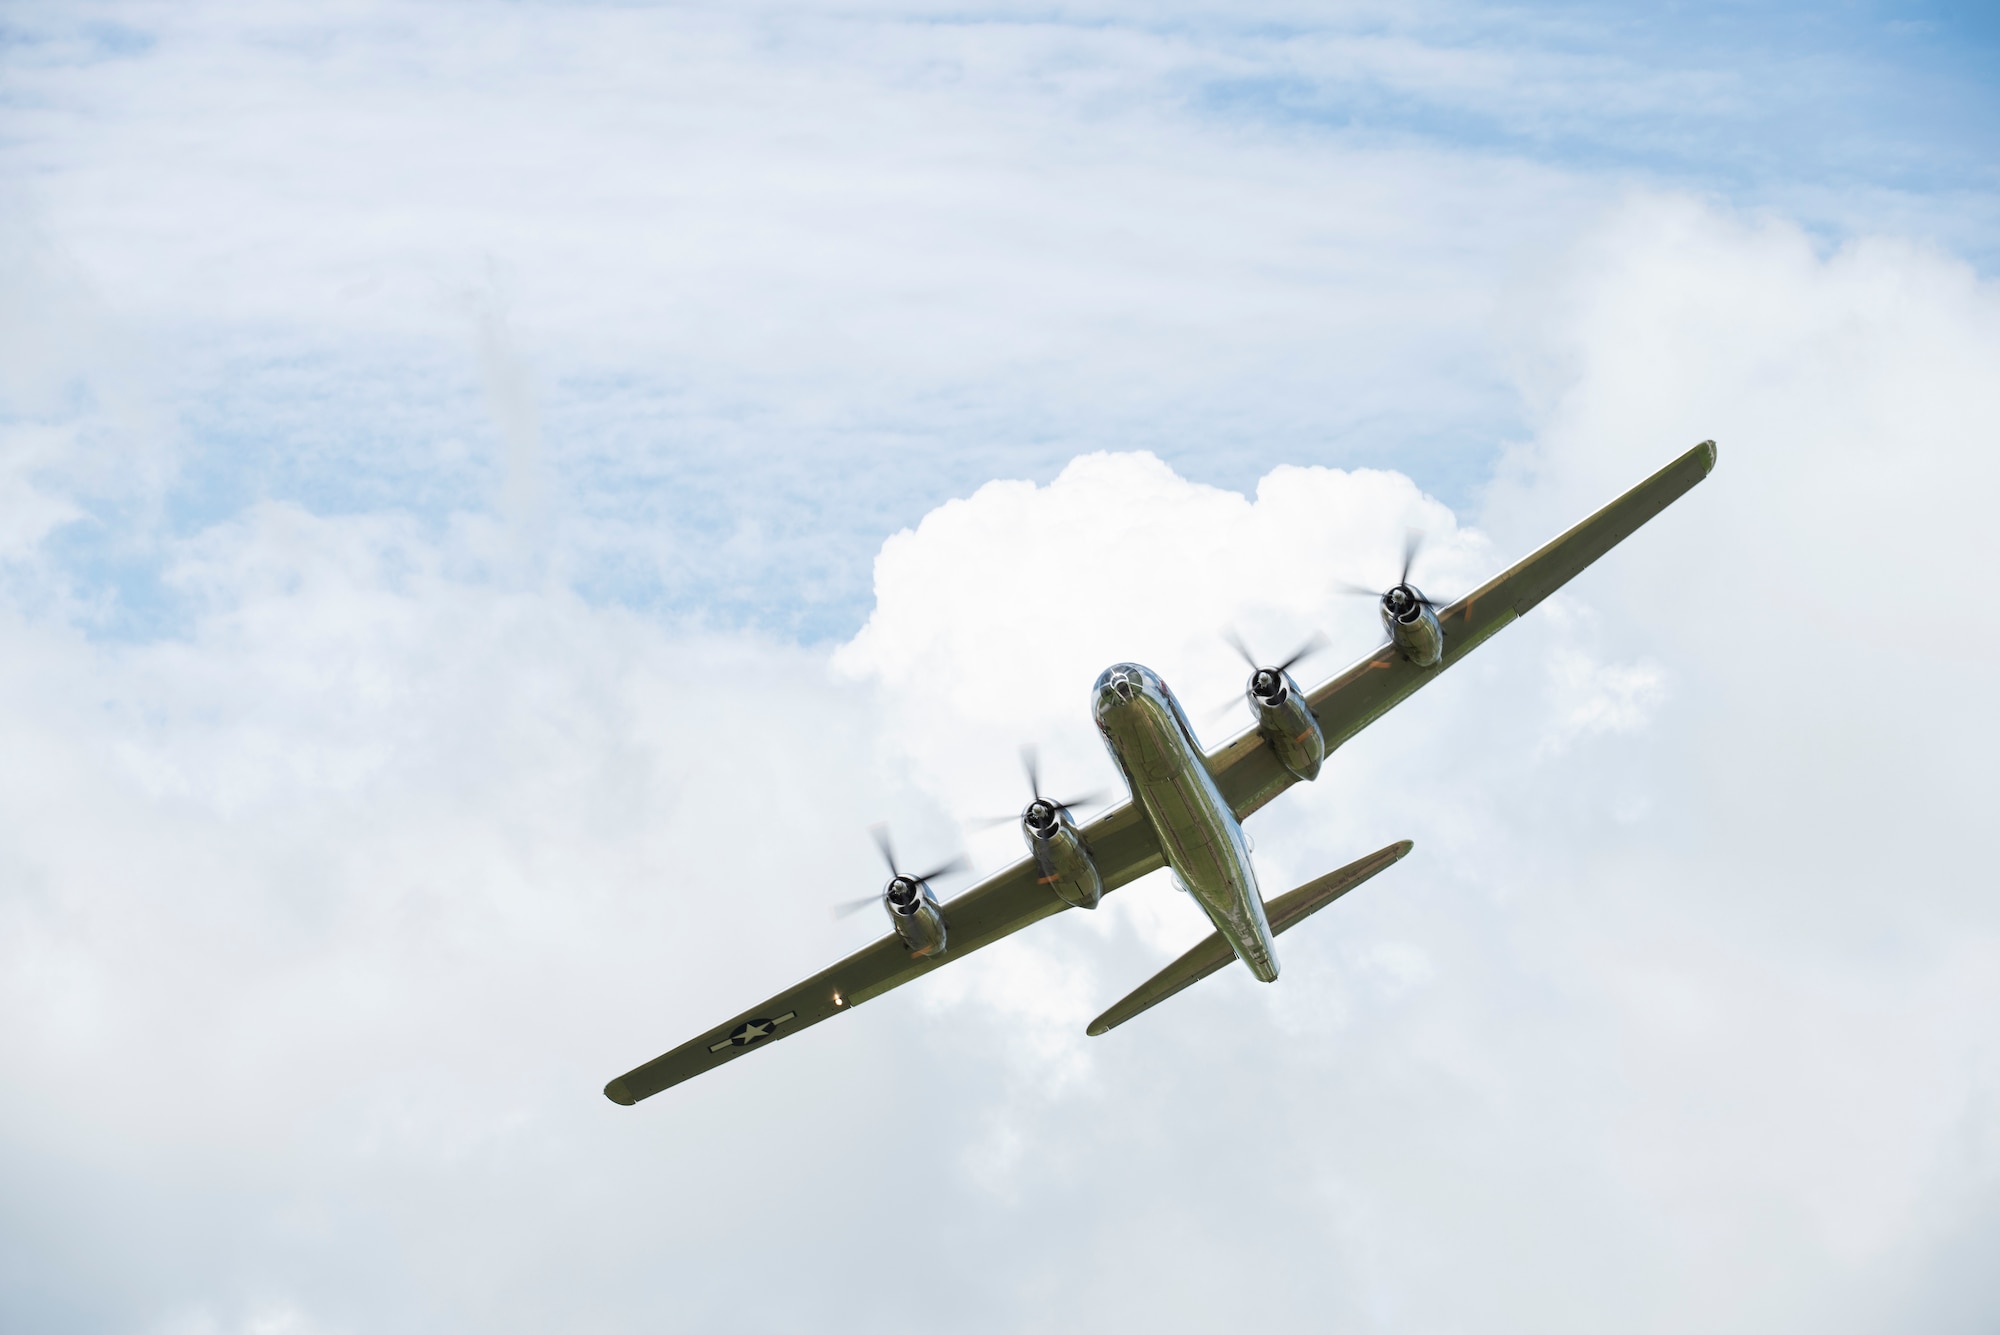 One of the two B-29 Superfortresses that still actively fly today soars over Whiteman Air Force Base, Missouri, on June 16, 2019. The B-29  is a four-engine propeller-driven heavy bomber designed by Boeing and flown primarily by the United States during World War II and the Korean War.(U.S. Air Force photo by Staff Sgt. Kayla White)